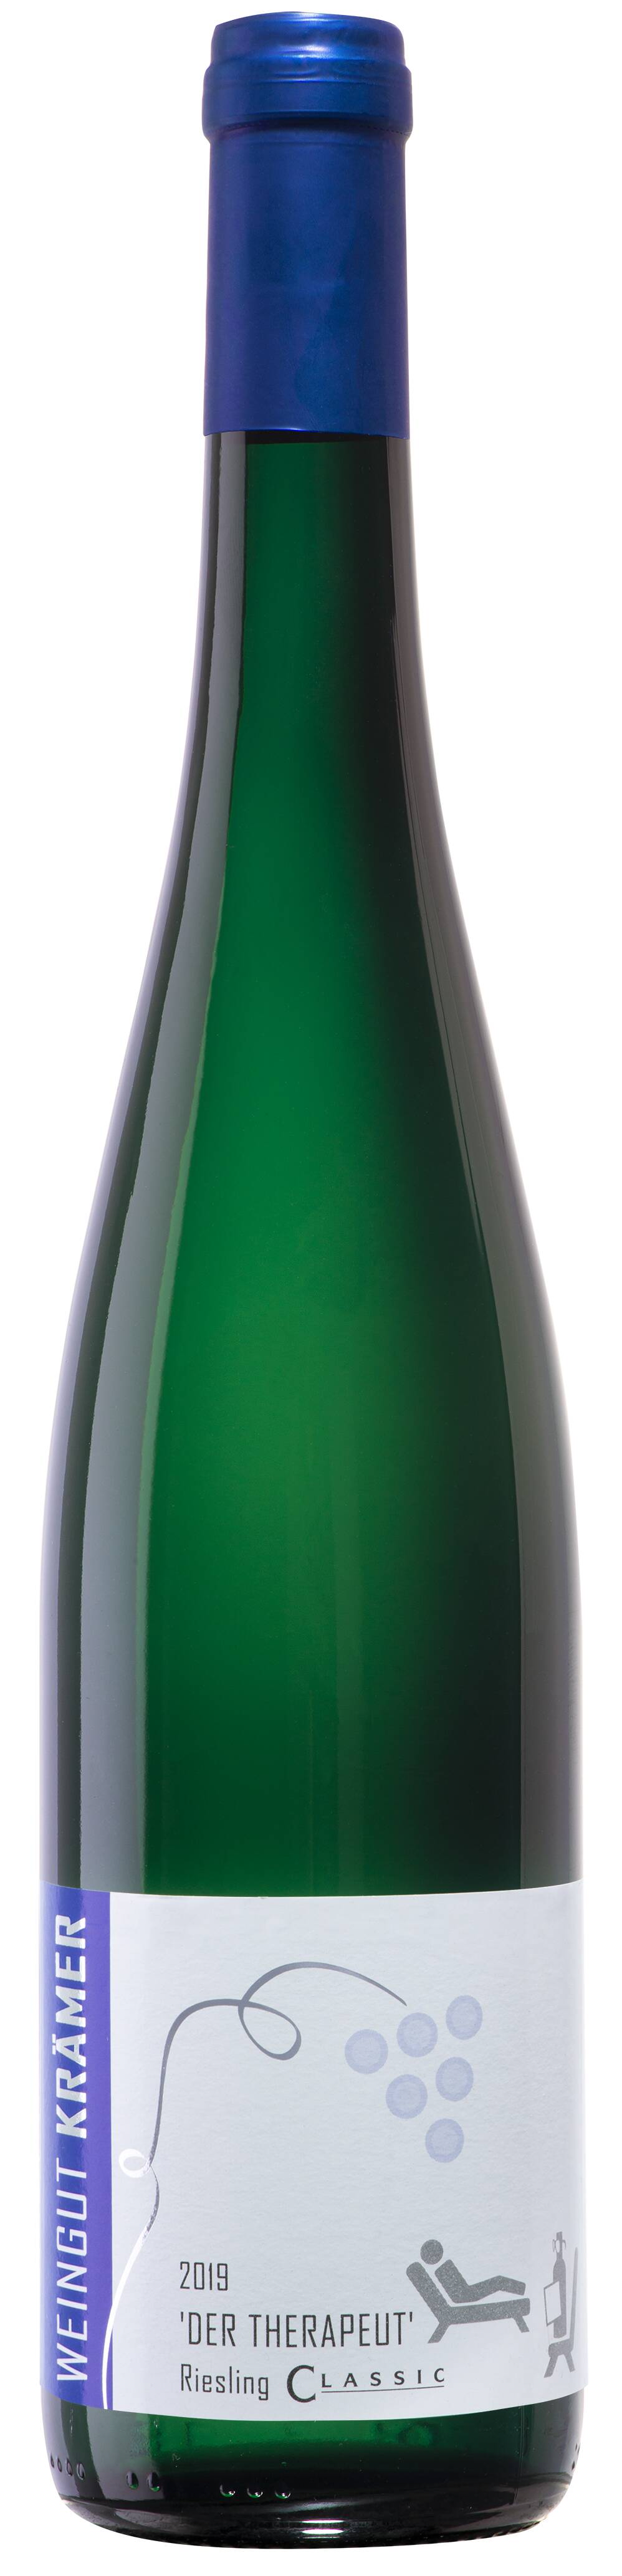 Riesling Classic "Der Therapeut" 2019